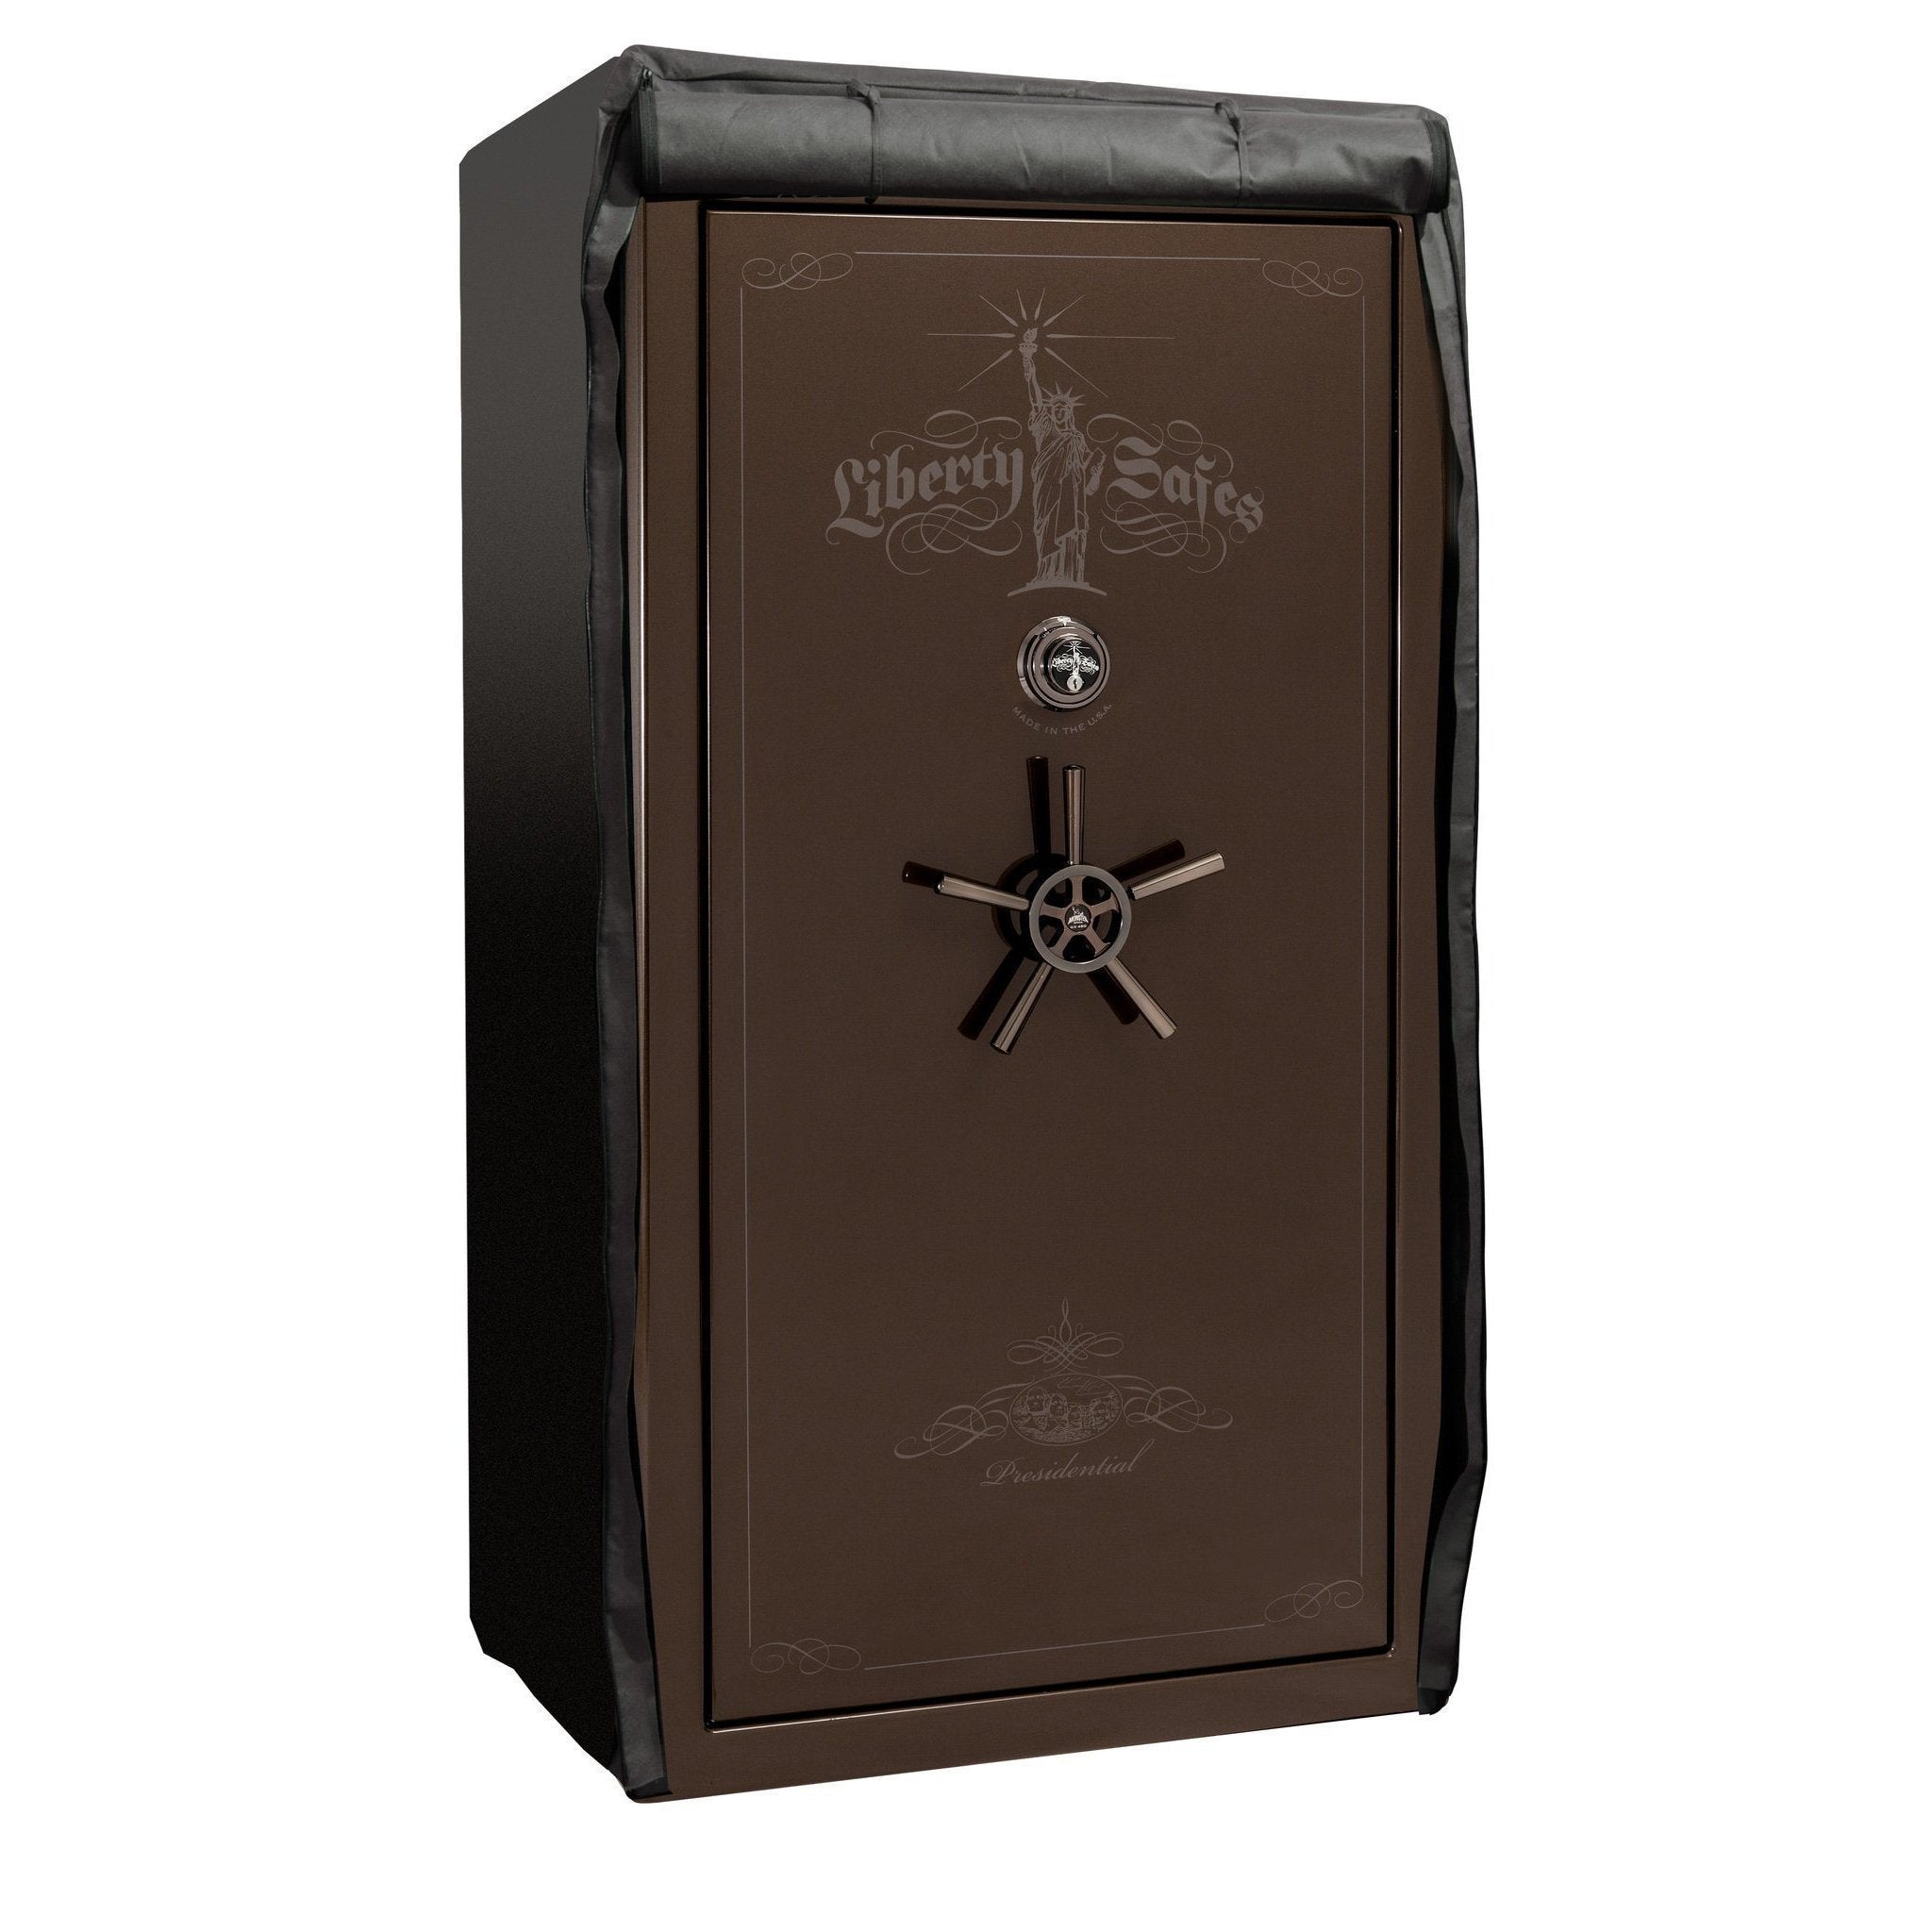 Accessory - Security - Safe Cover - 40 size safes, photo 1